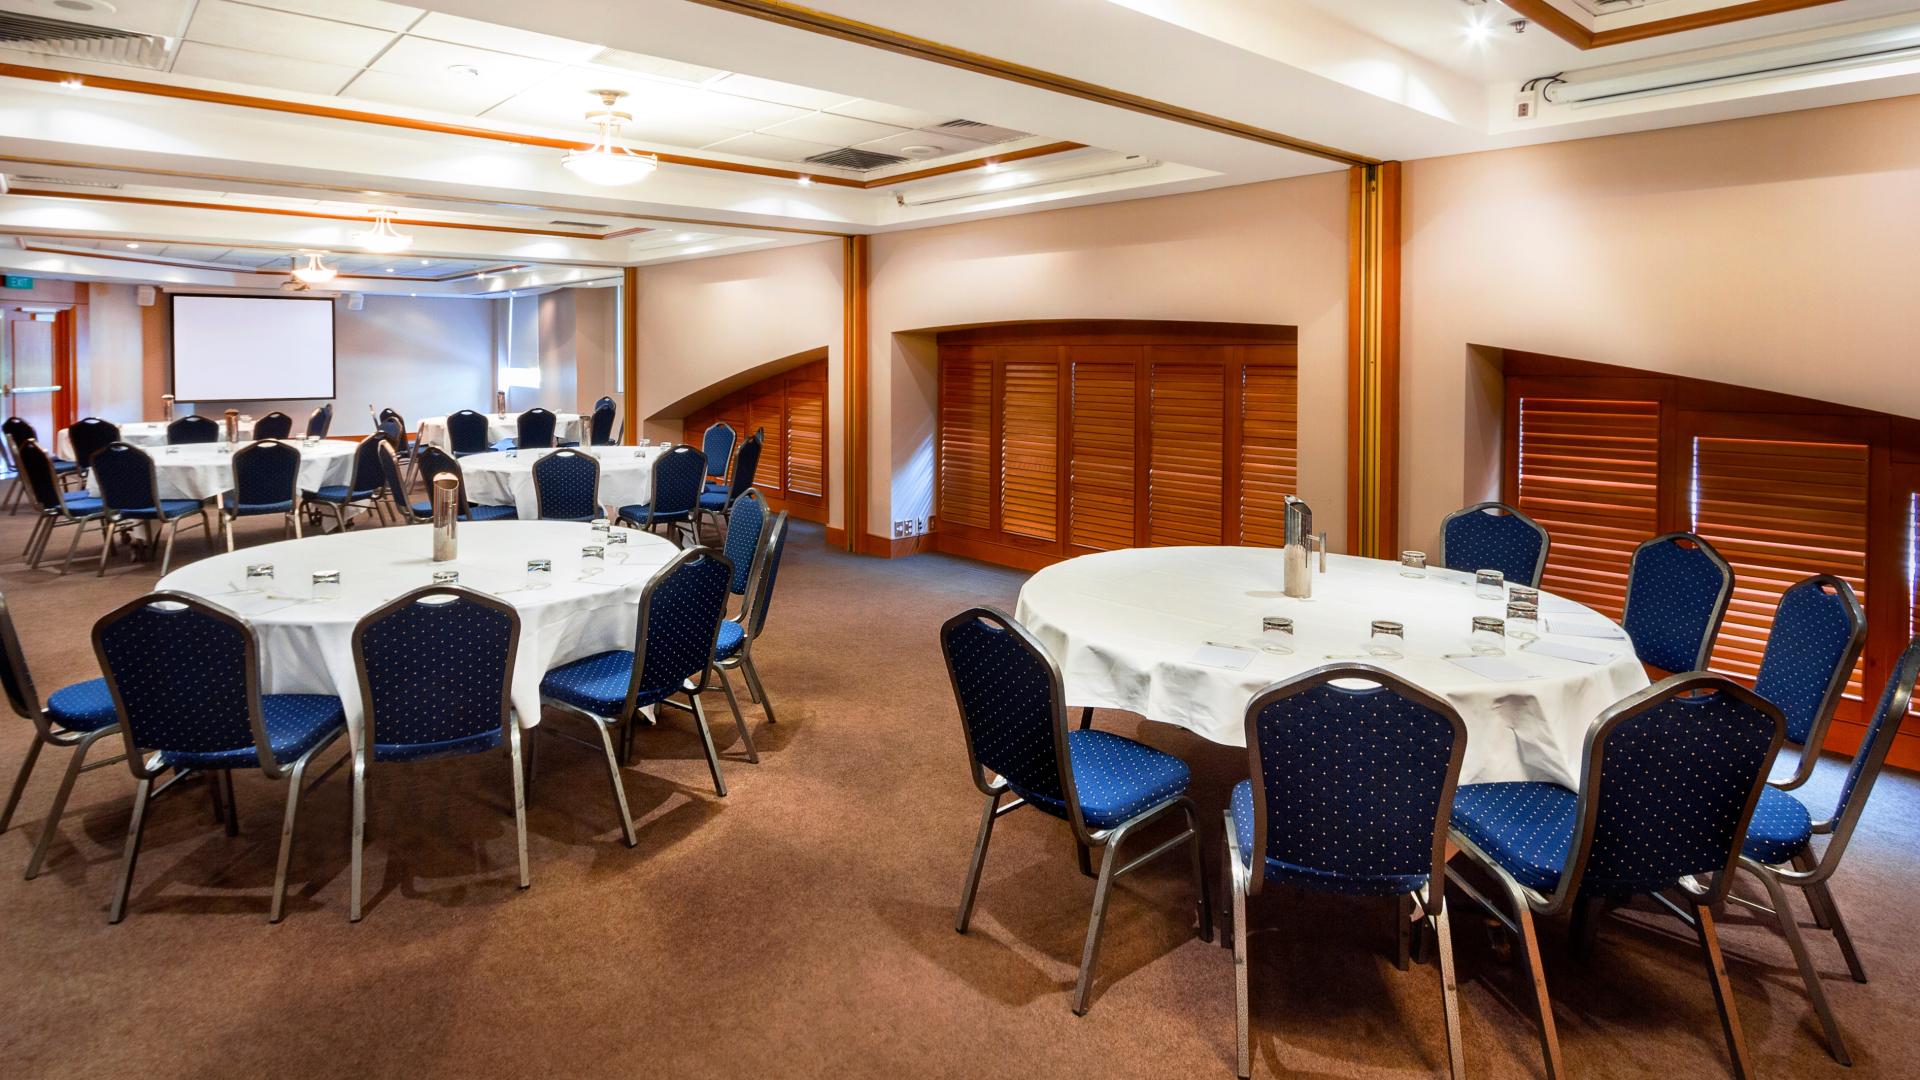 Function Rooms for Hire in Eastern Suburbs